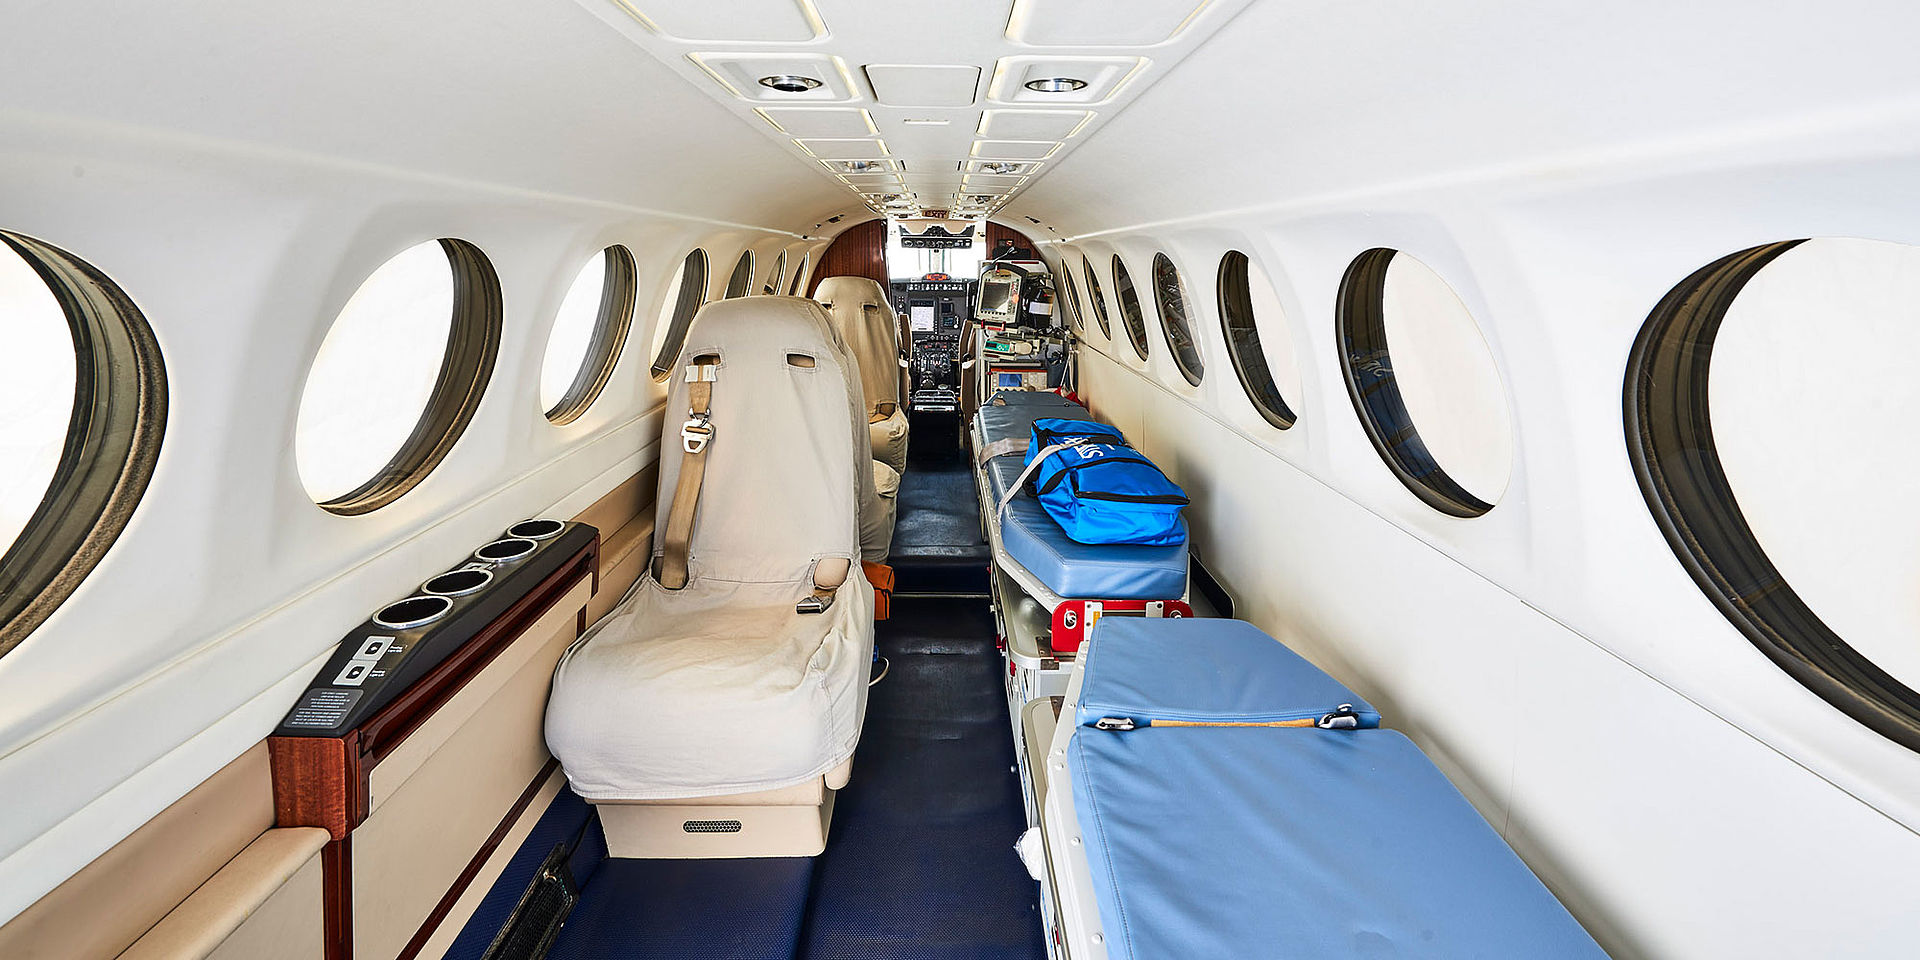 For sale: King Air FL-504 Ambulance frontview